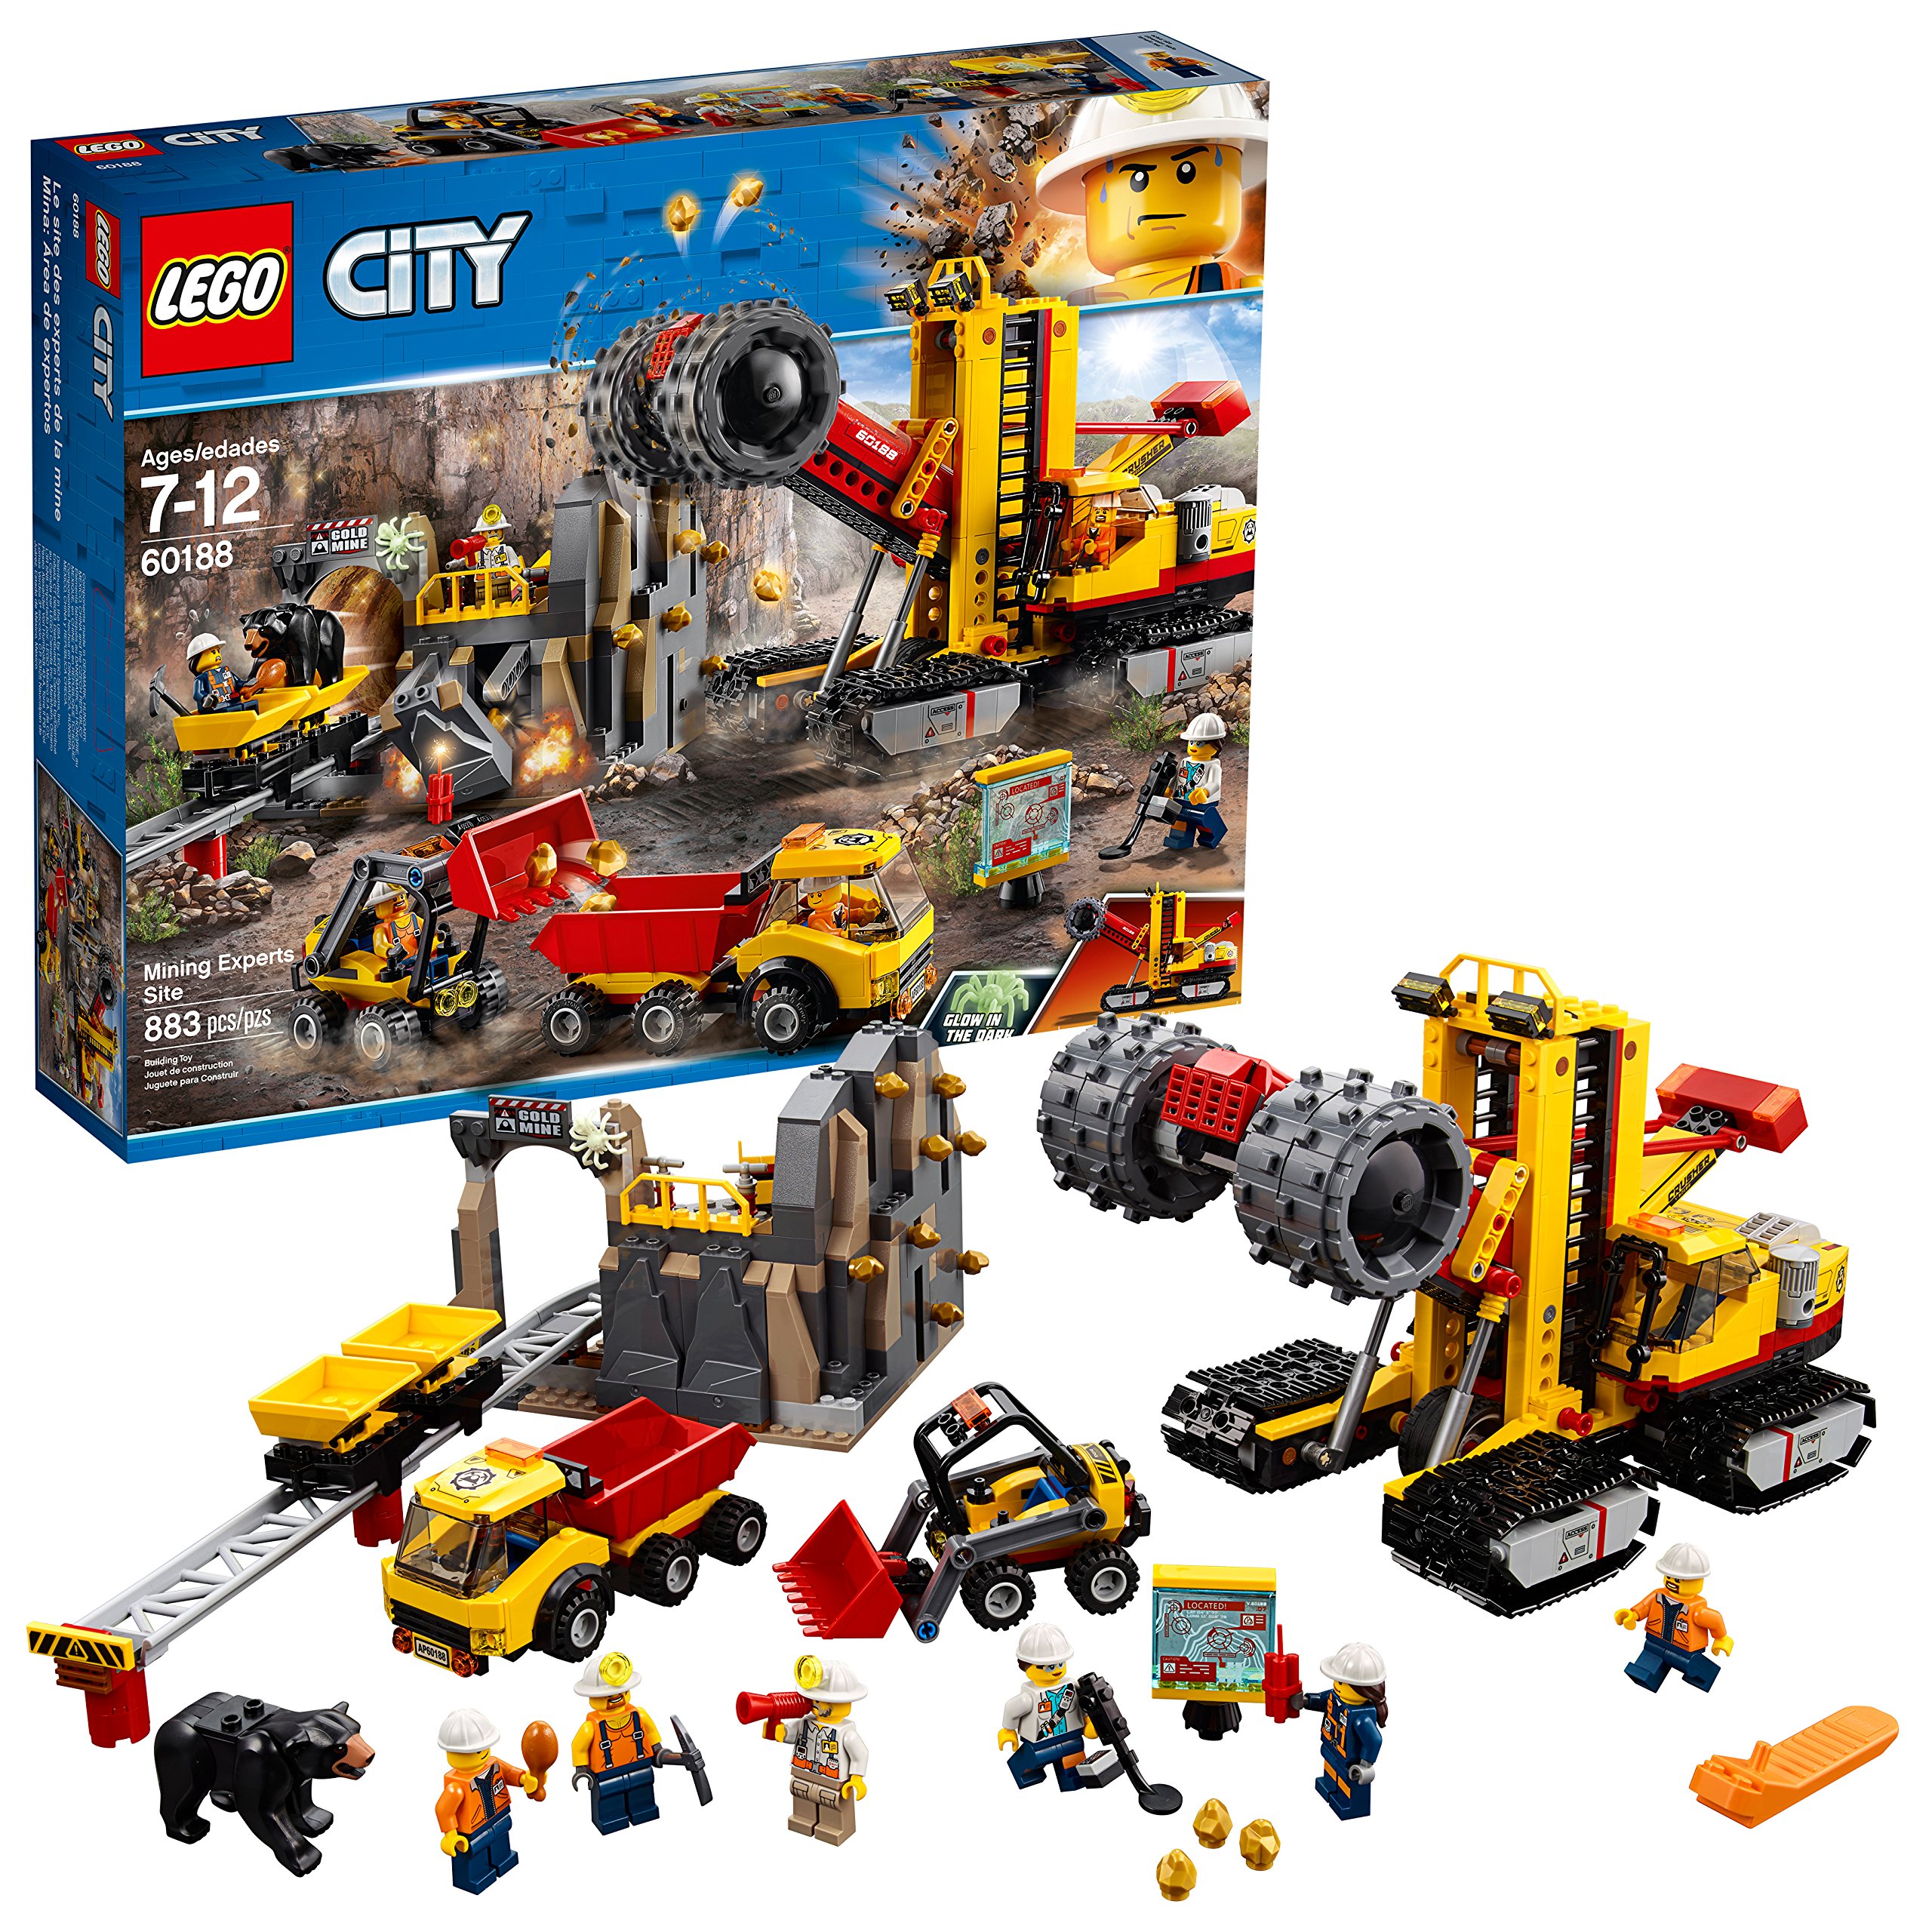 Book Cover LEGO City Mining Experts Site 60188 Building Kit (883 Piece) (Discontinued by Manufacturer)